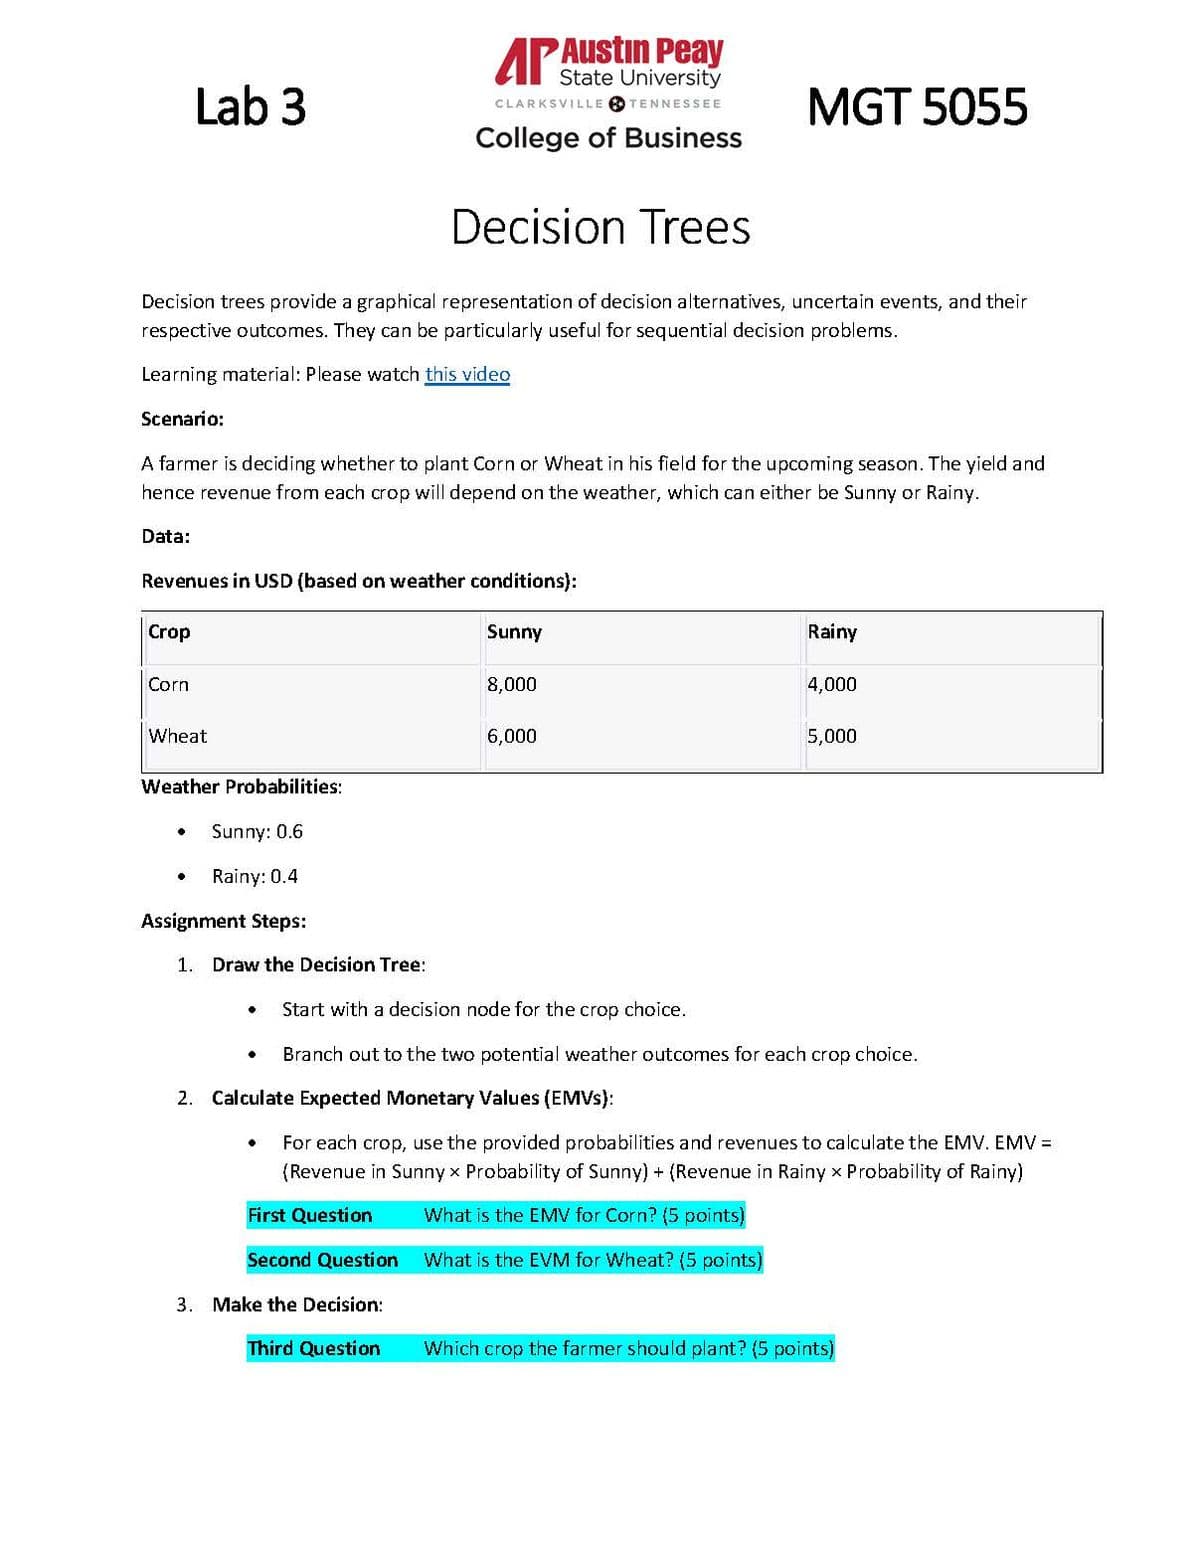 Lab 3
AP Austin Peay
State University
CLARKSVILLE TENNESSEE
College of Business
Decision Trees
MGT 5055
Decision trees provide a graphical representation of decision alternatives, uncertain events, and their
respective outcomes. They can be particularly useful for sequential decision problems.
Learning material: Please watch this video
Scenario:
A farmer is deciding whether to plant Corn or Wheat in his field for the upcoming season. The yield and
hence revenue from each crop will depend on the weather, which can either be Sunny or Rainy.
Data:
Revenues in USD (based on weather conditions):
Crop
Corn
Wheat
Weather Probabilities:
•
Sunny: 0.6
•
Rainy: 0.4
Assignment Steps:
1. Draw the Decision Tree:
Sunny
Rainy
8,000
4,000
6,000
5,000
•
Start with a decision node for the crop choice.
•
Branch out to the two potential weather outcomes for each crop choice.
2. Calculate Expected Monetary Values (EMVs):
For each crop, use the provided probabilities and revenues to calculate the EMV. EMV =
(Revenue in Sunnyx Probability of Sunny) + (Revenue in Rainy x Probability of Rainy)
First Question
Second Question
3. Make the Decision:
Third Question
What is the EMV for Corn? (5 points)
What is the EVM for Wheat? (5 points)
Which crop the farmer should plant? (5 points)